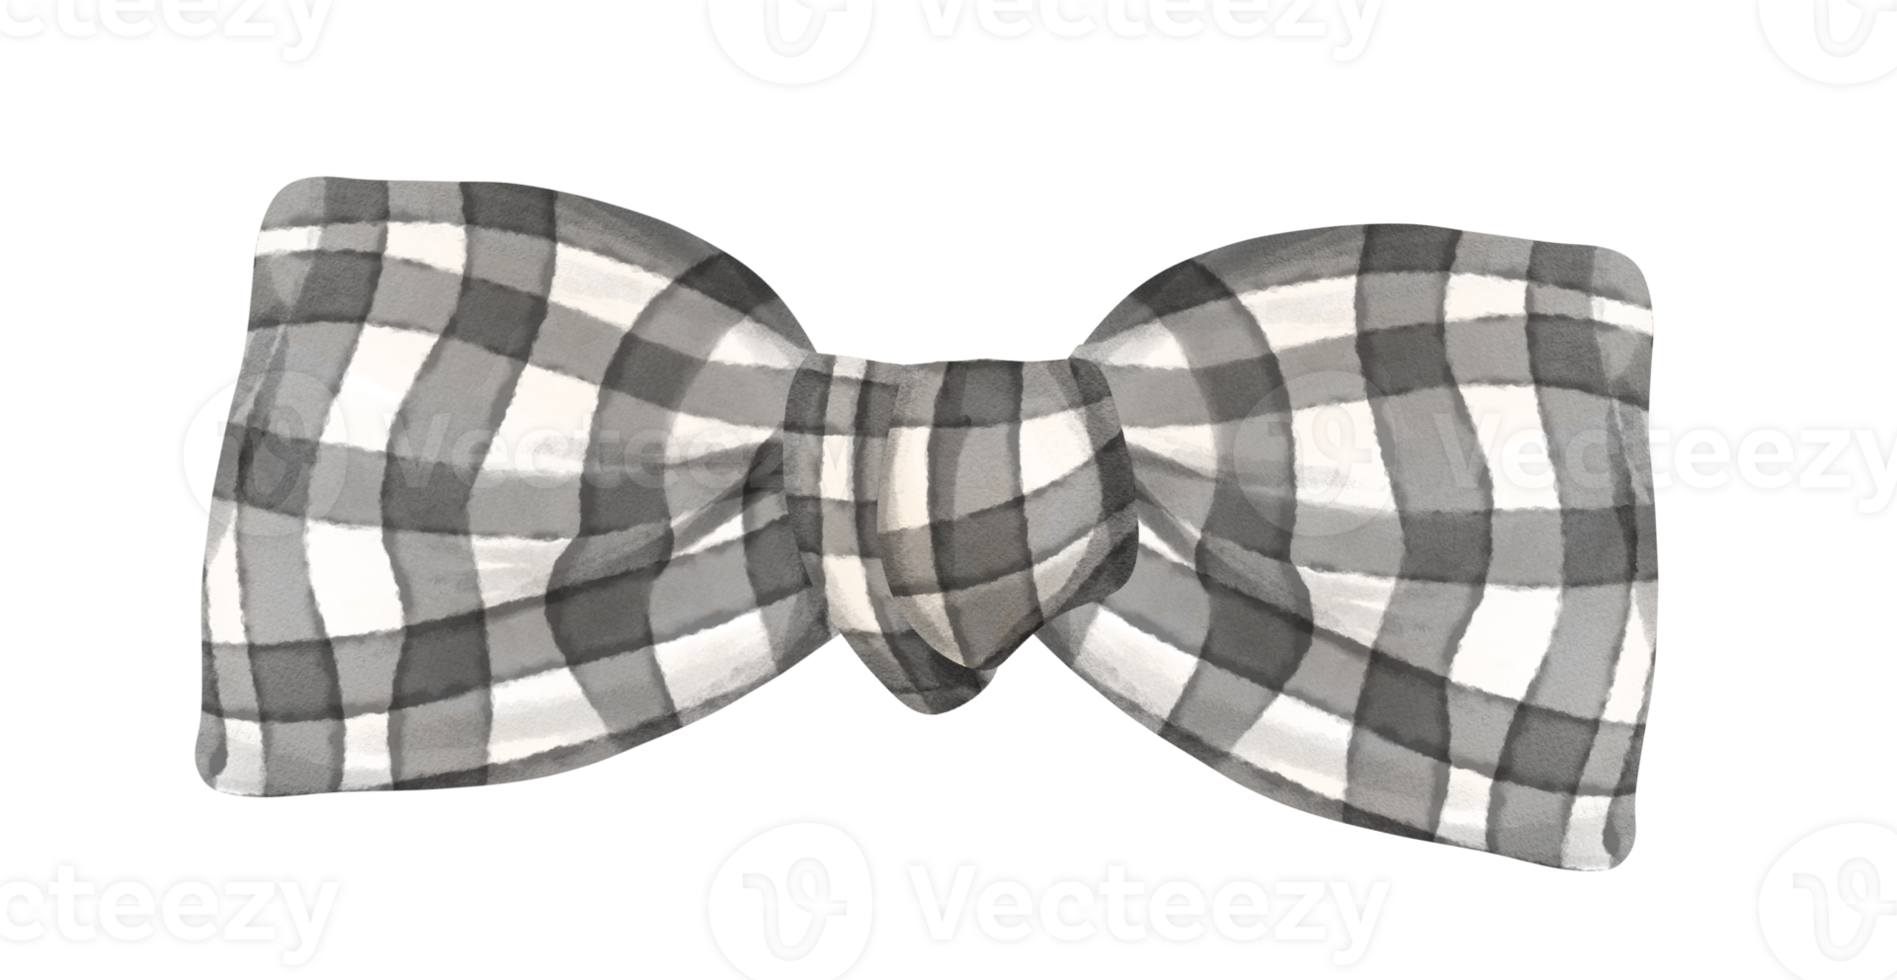 cute check striped ribbon hair bow tie watercolour illustration png